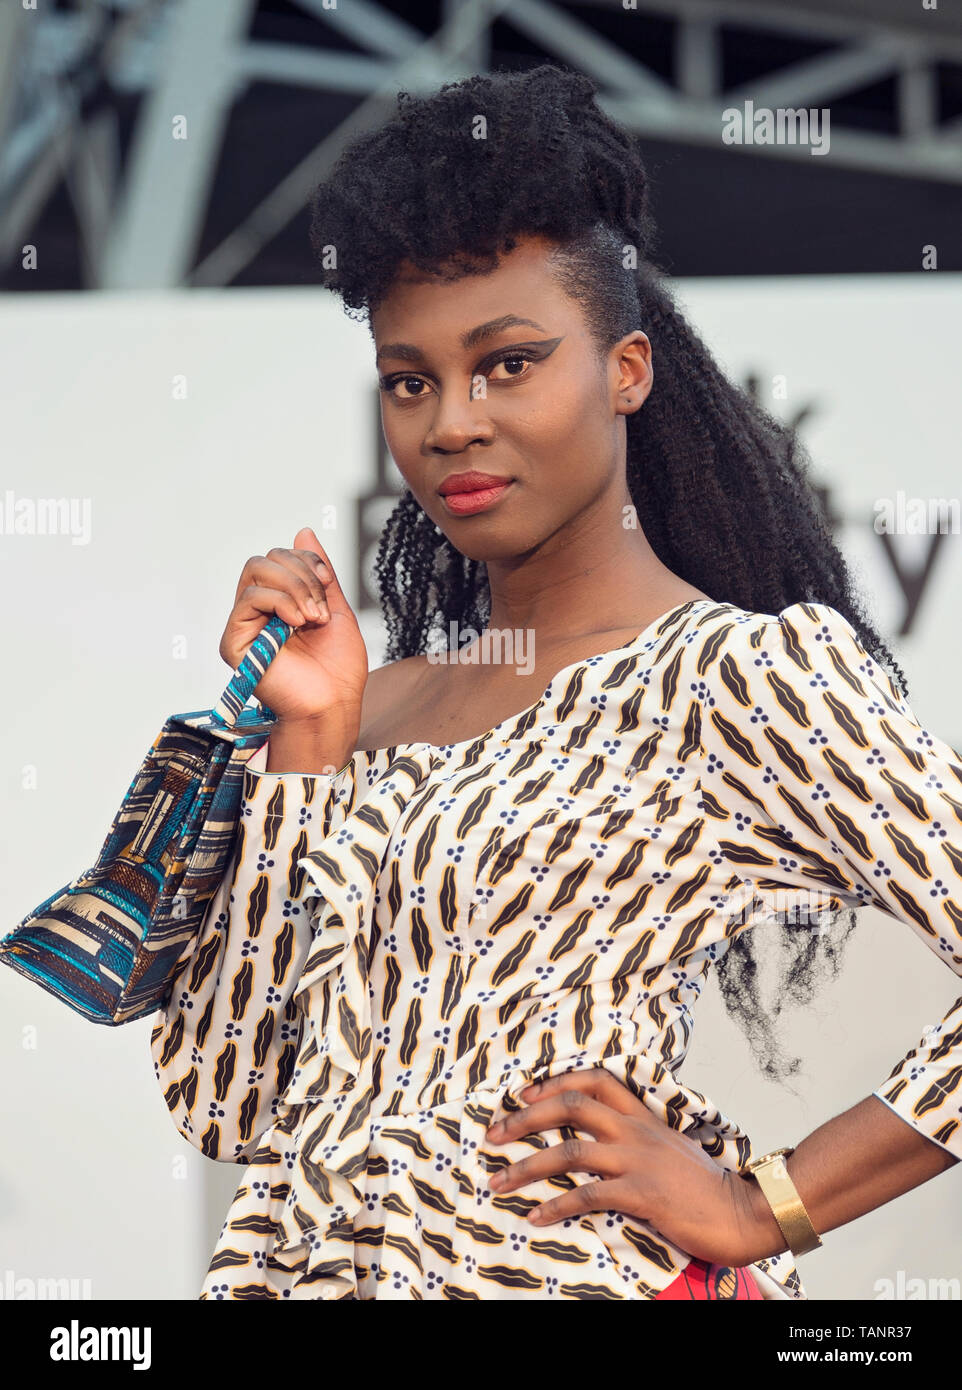 Photos taken at the 2019 Afro Hair & Beauty show live held hosted by Stacey Phipps & Scarlette Douglas on 26/27 . This is the 38th year of the event ! Stock Photo